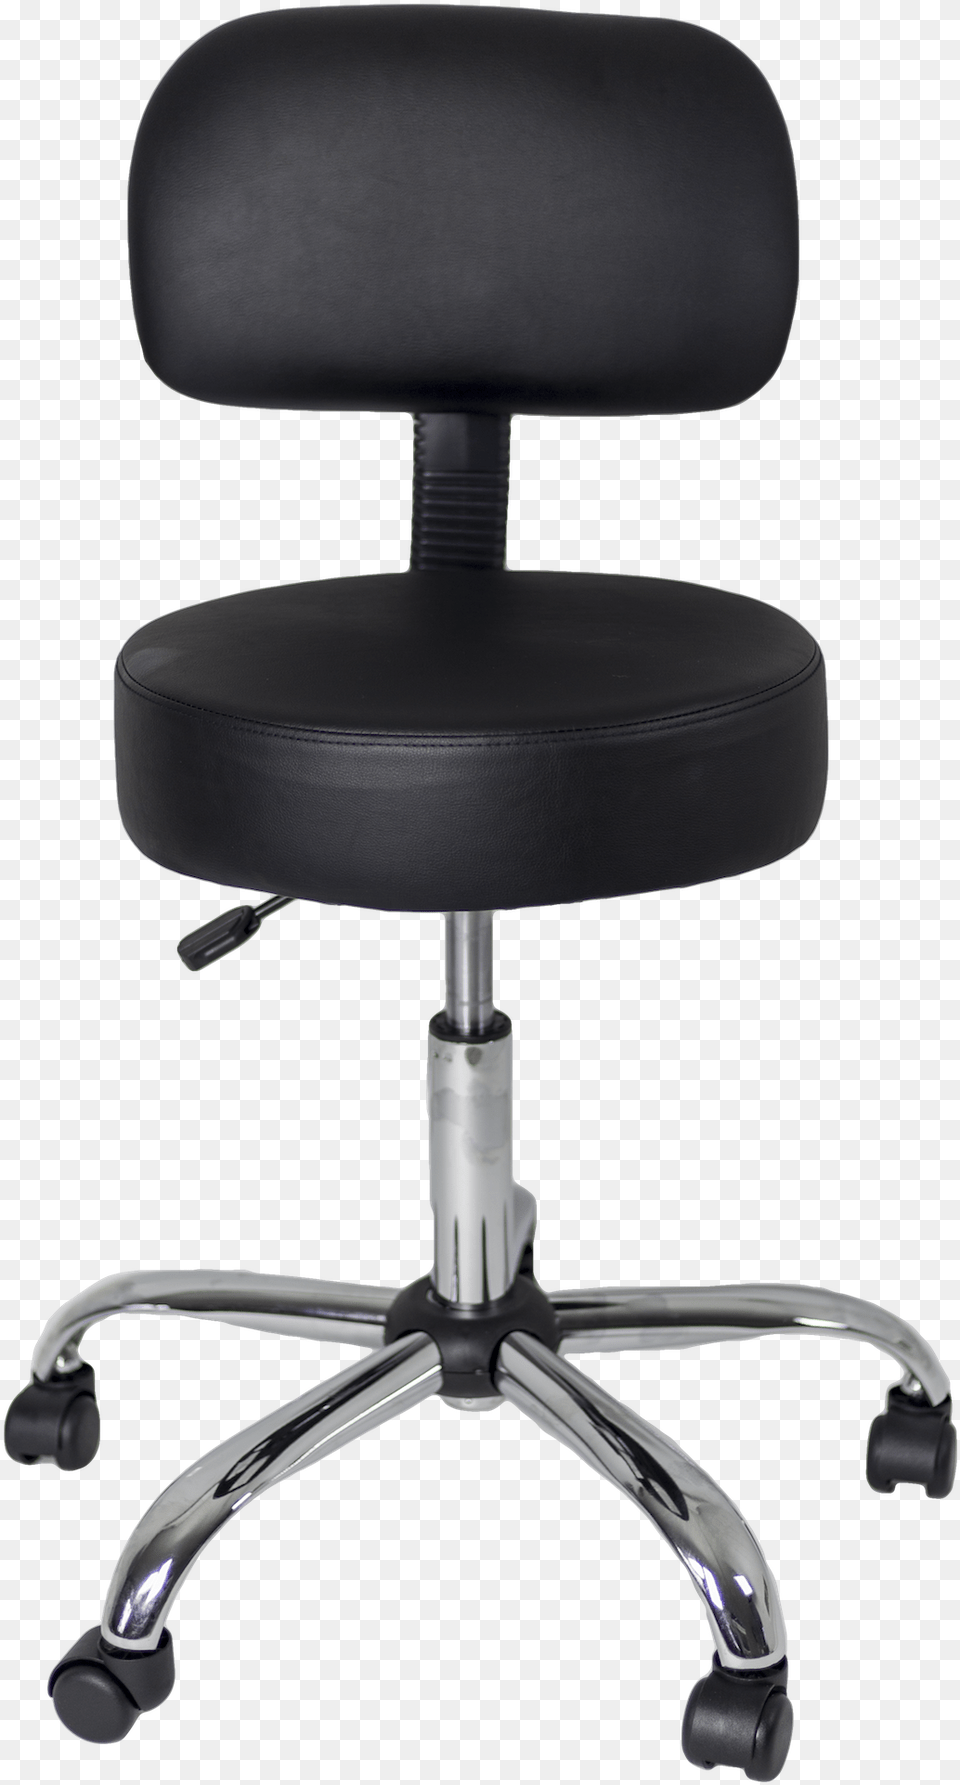 Article Doctor Stool Img 9133 Chair For Guitarist, Cushion, Furniture, Home Decor, Appliance Free Transparent Png